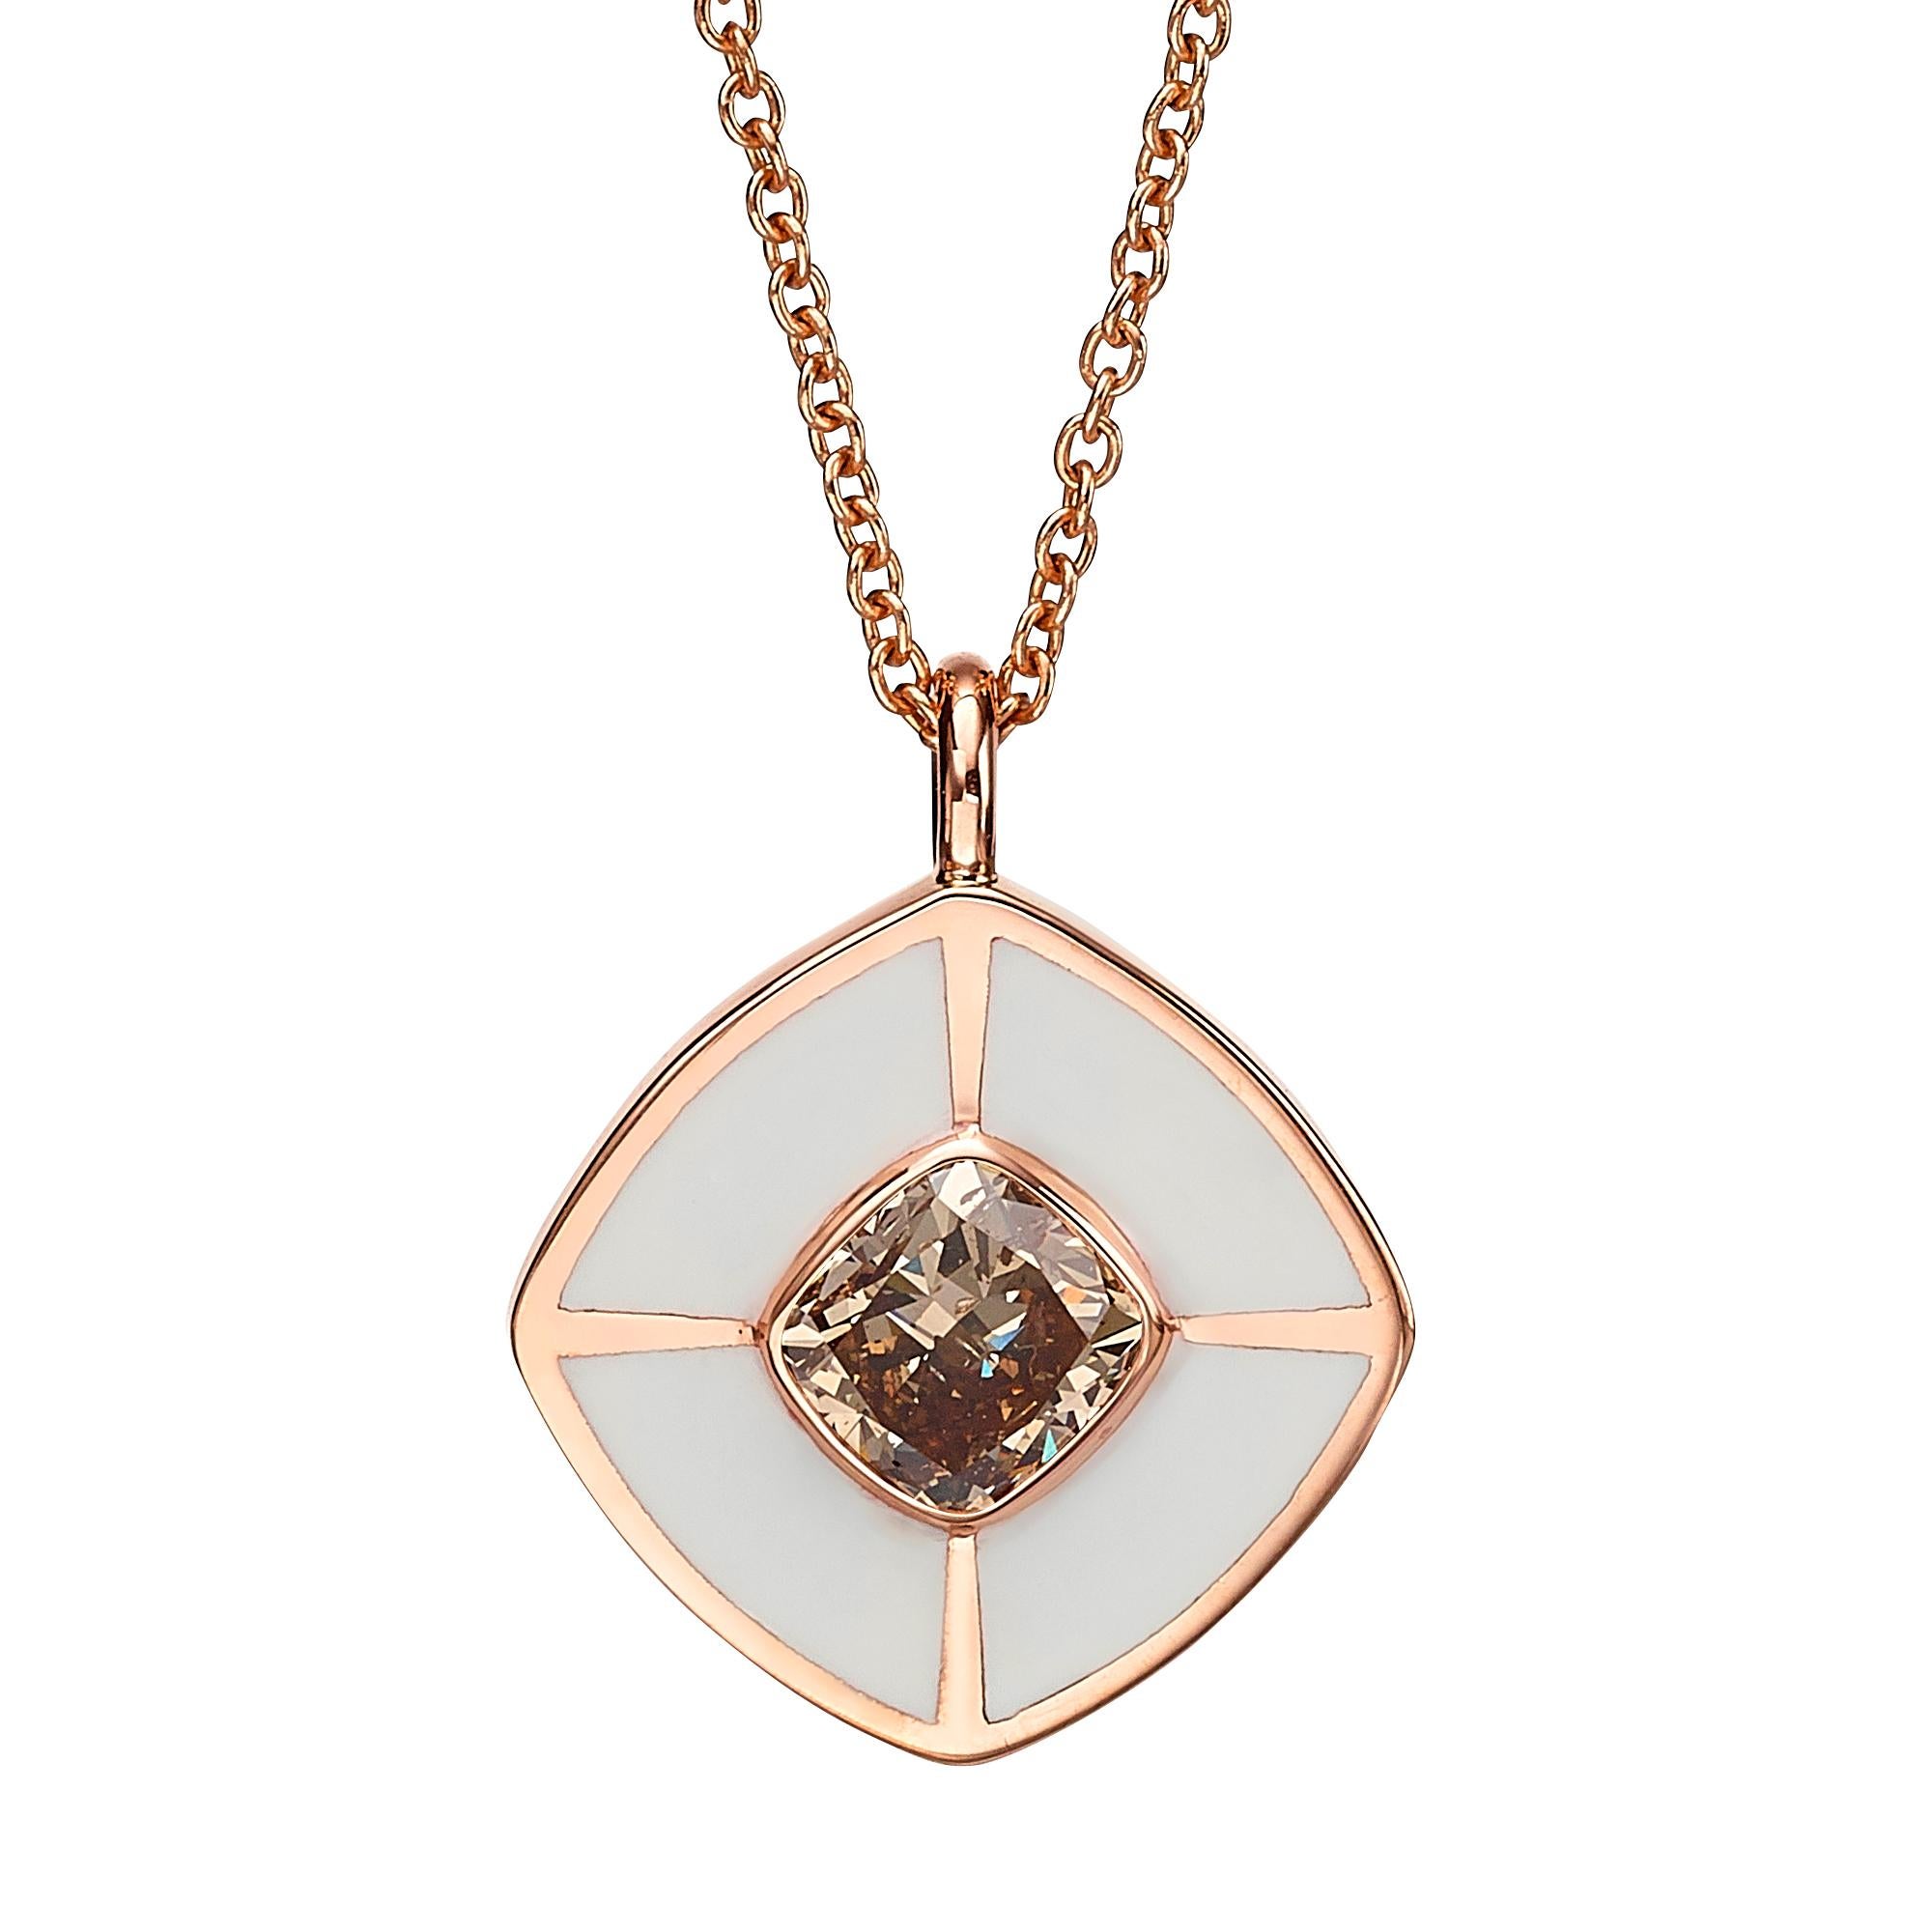 SKU# 4006142

Introducing a Cushion-Cut pendant crafted in luxurious 18K rose gold, adorned with exquisite white enamel and featuring a 1.01 carat champagne color cushion cut diamond. This stunning pendant exudes elegance and sophistication, perfect